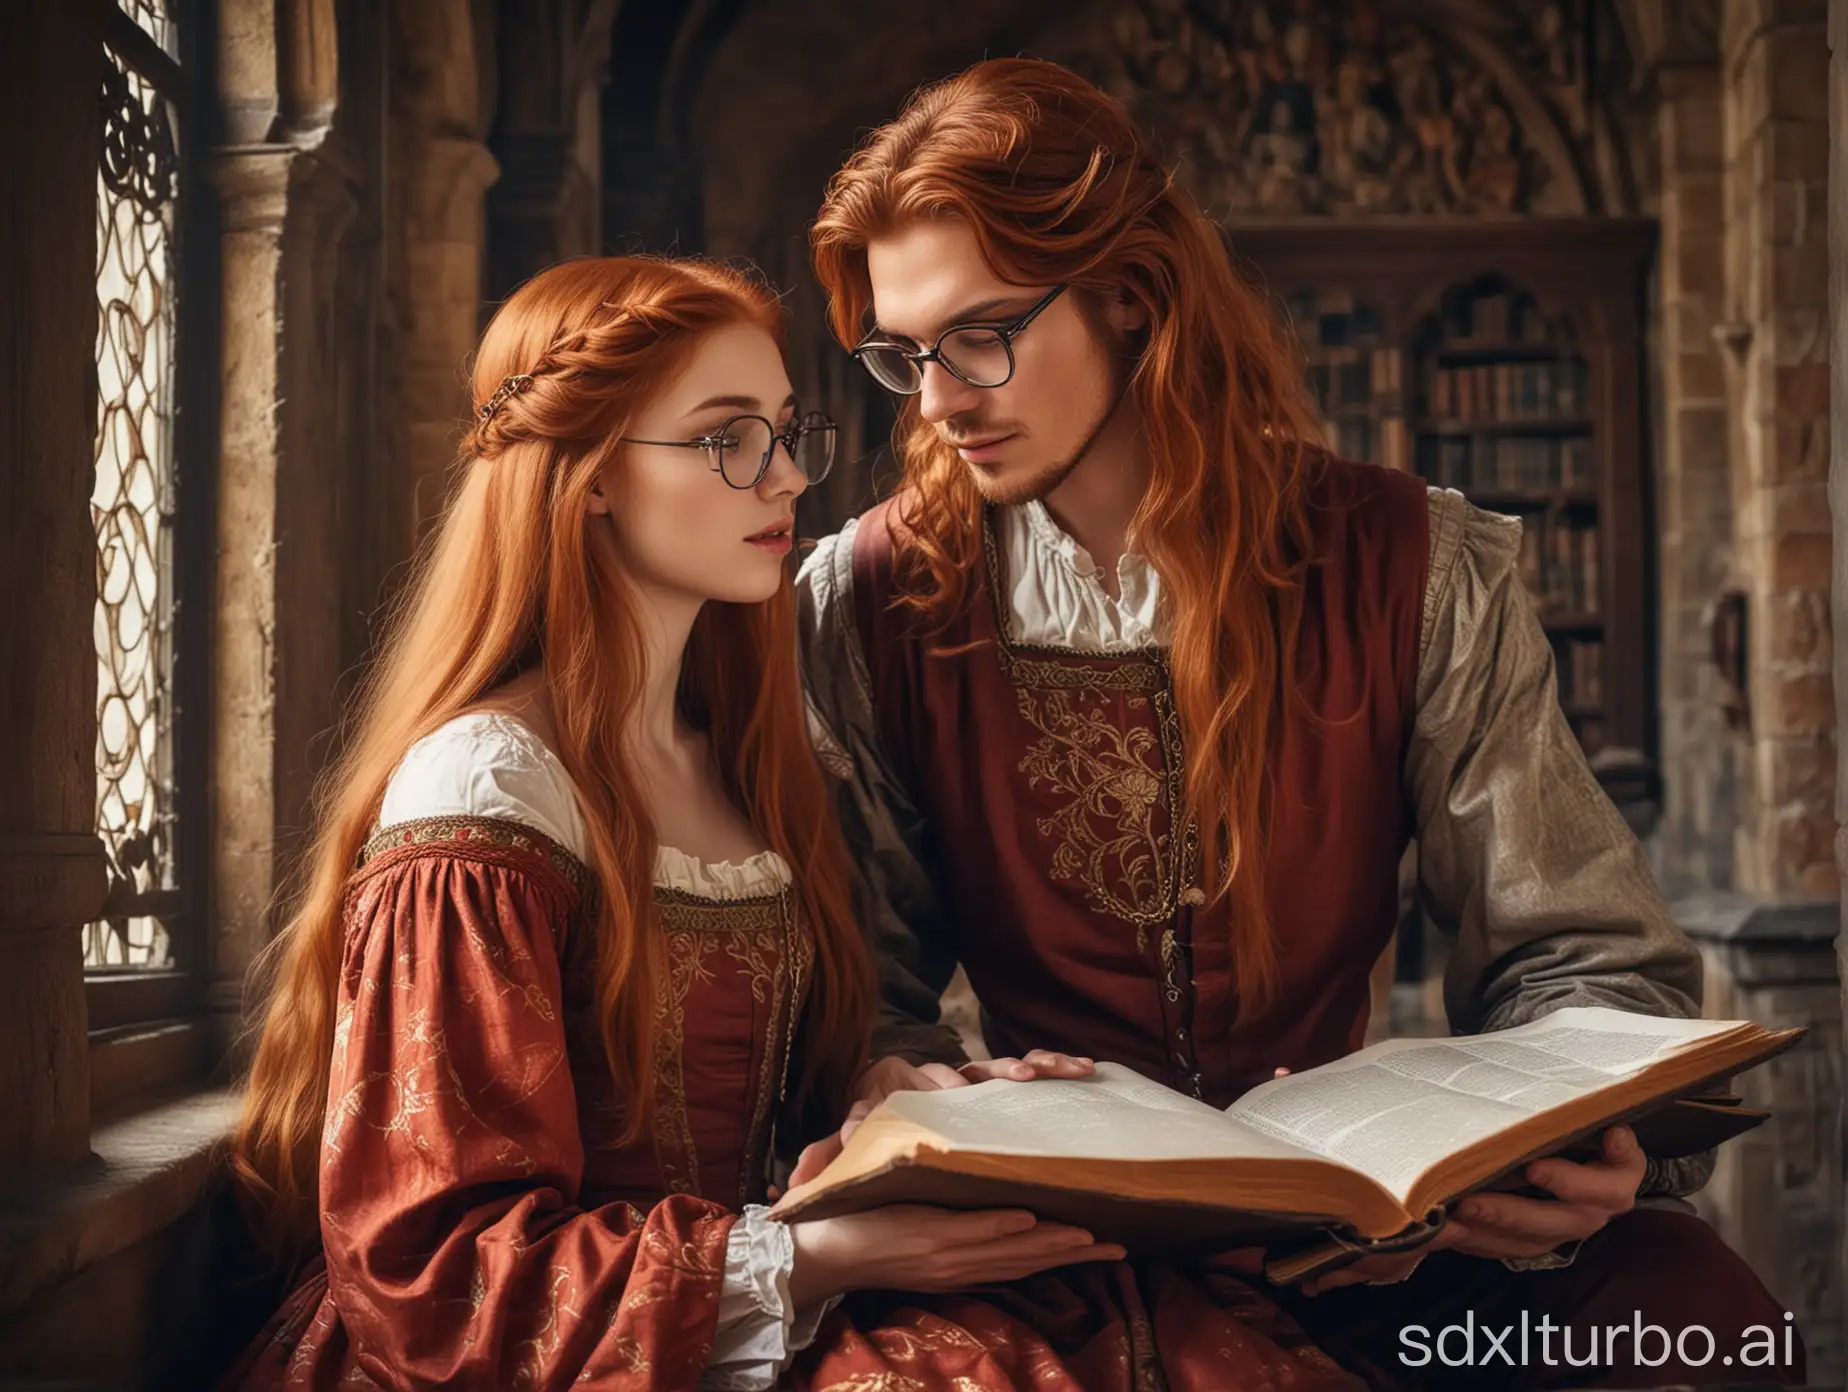 A beautiful girl with long red hair in a medieval pretty dress and a guy with glasses and medium-length russet hair in medieval pretty clothes sit together, engrossed in reading an ancient folio, in an ancient library